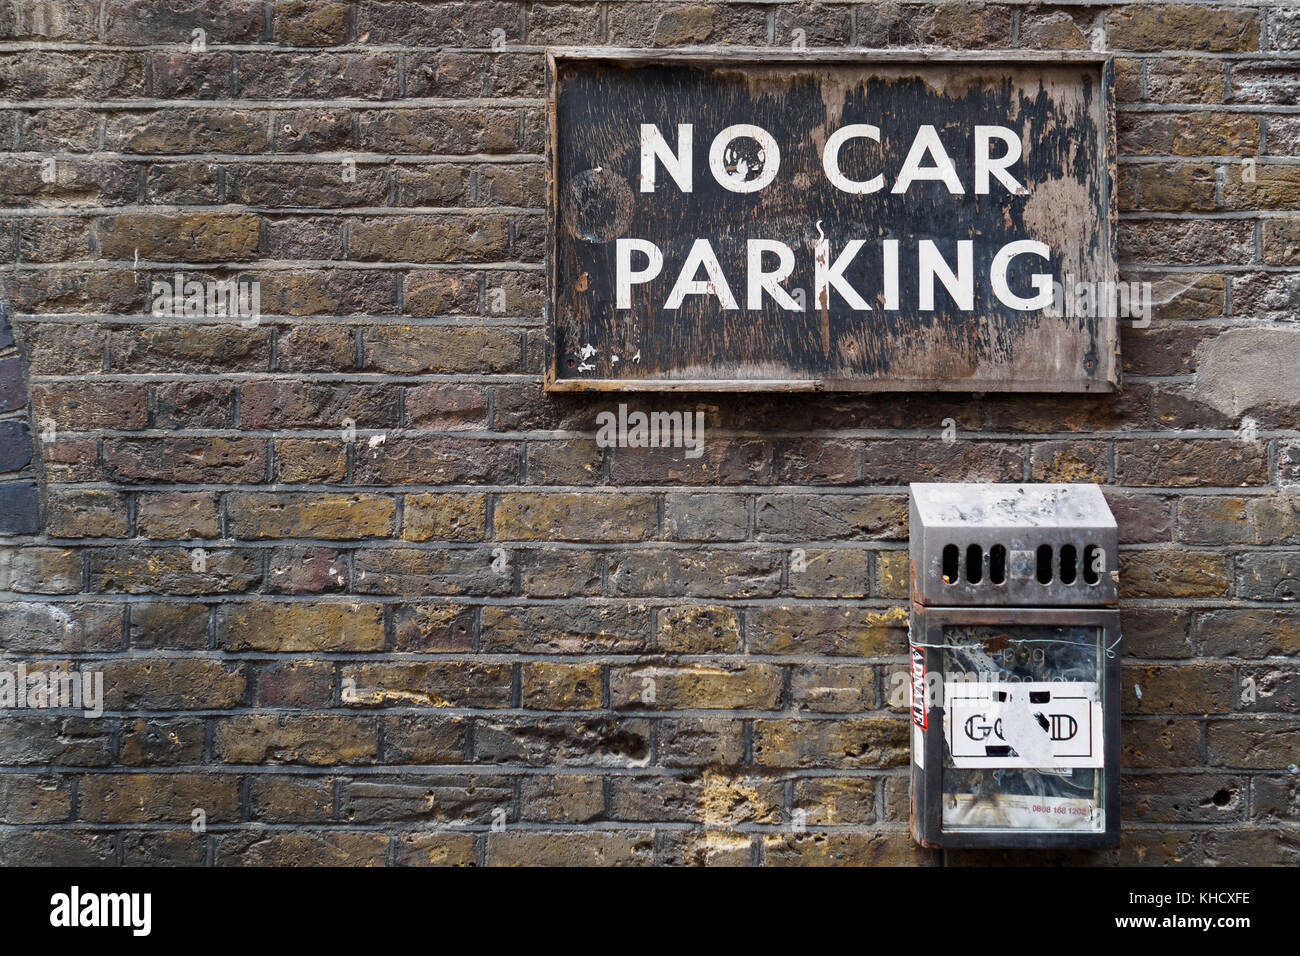 Brick masonry wall with a vintage 'No Car Parking' sign. Landscape format. Vintage look. Stock Photo